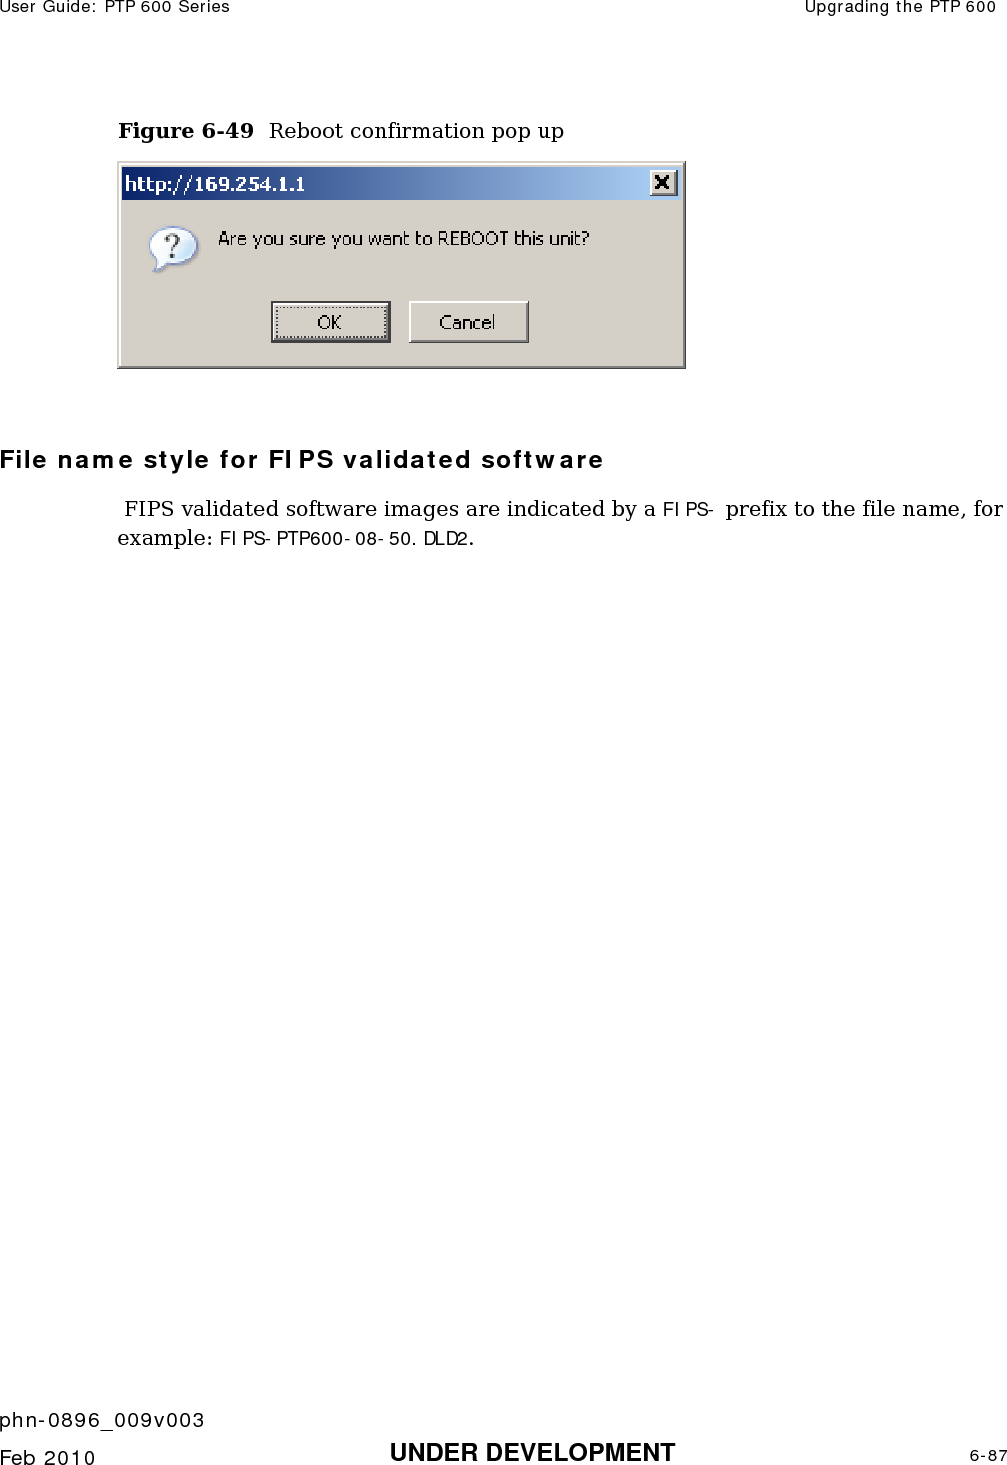 User Guide: PTP 600 Series  Upgrading the PTP 600    phn-0896_009v003   Feb 2010  UNDER DEVELOPMENT  6-87  Figure 6-49  Reboot confirmation pop up   File name style for FIPS validated software  FIPS validated software images are indicated by a FIPS- prefix to the file name, for example: FIPS-PTP600-08-50.DLD2.   